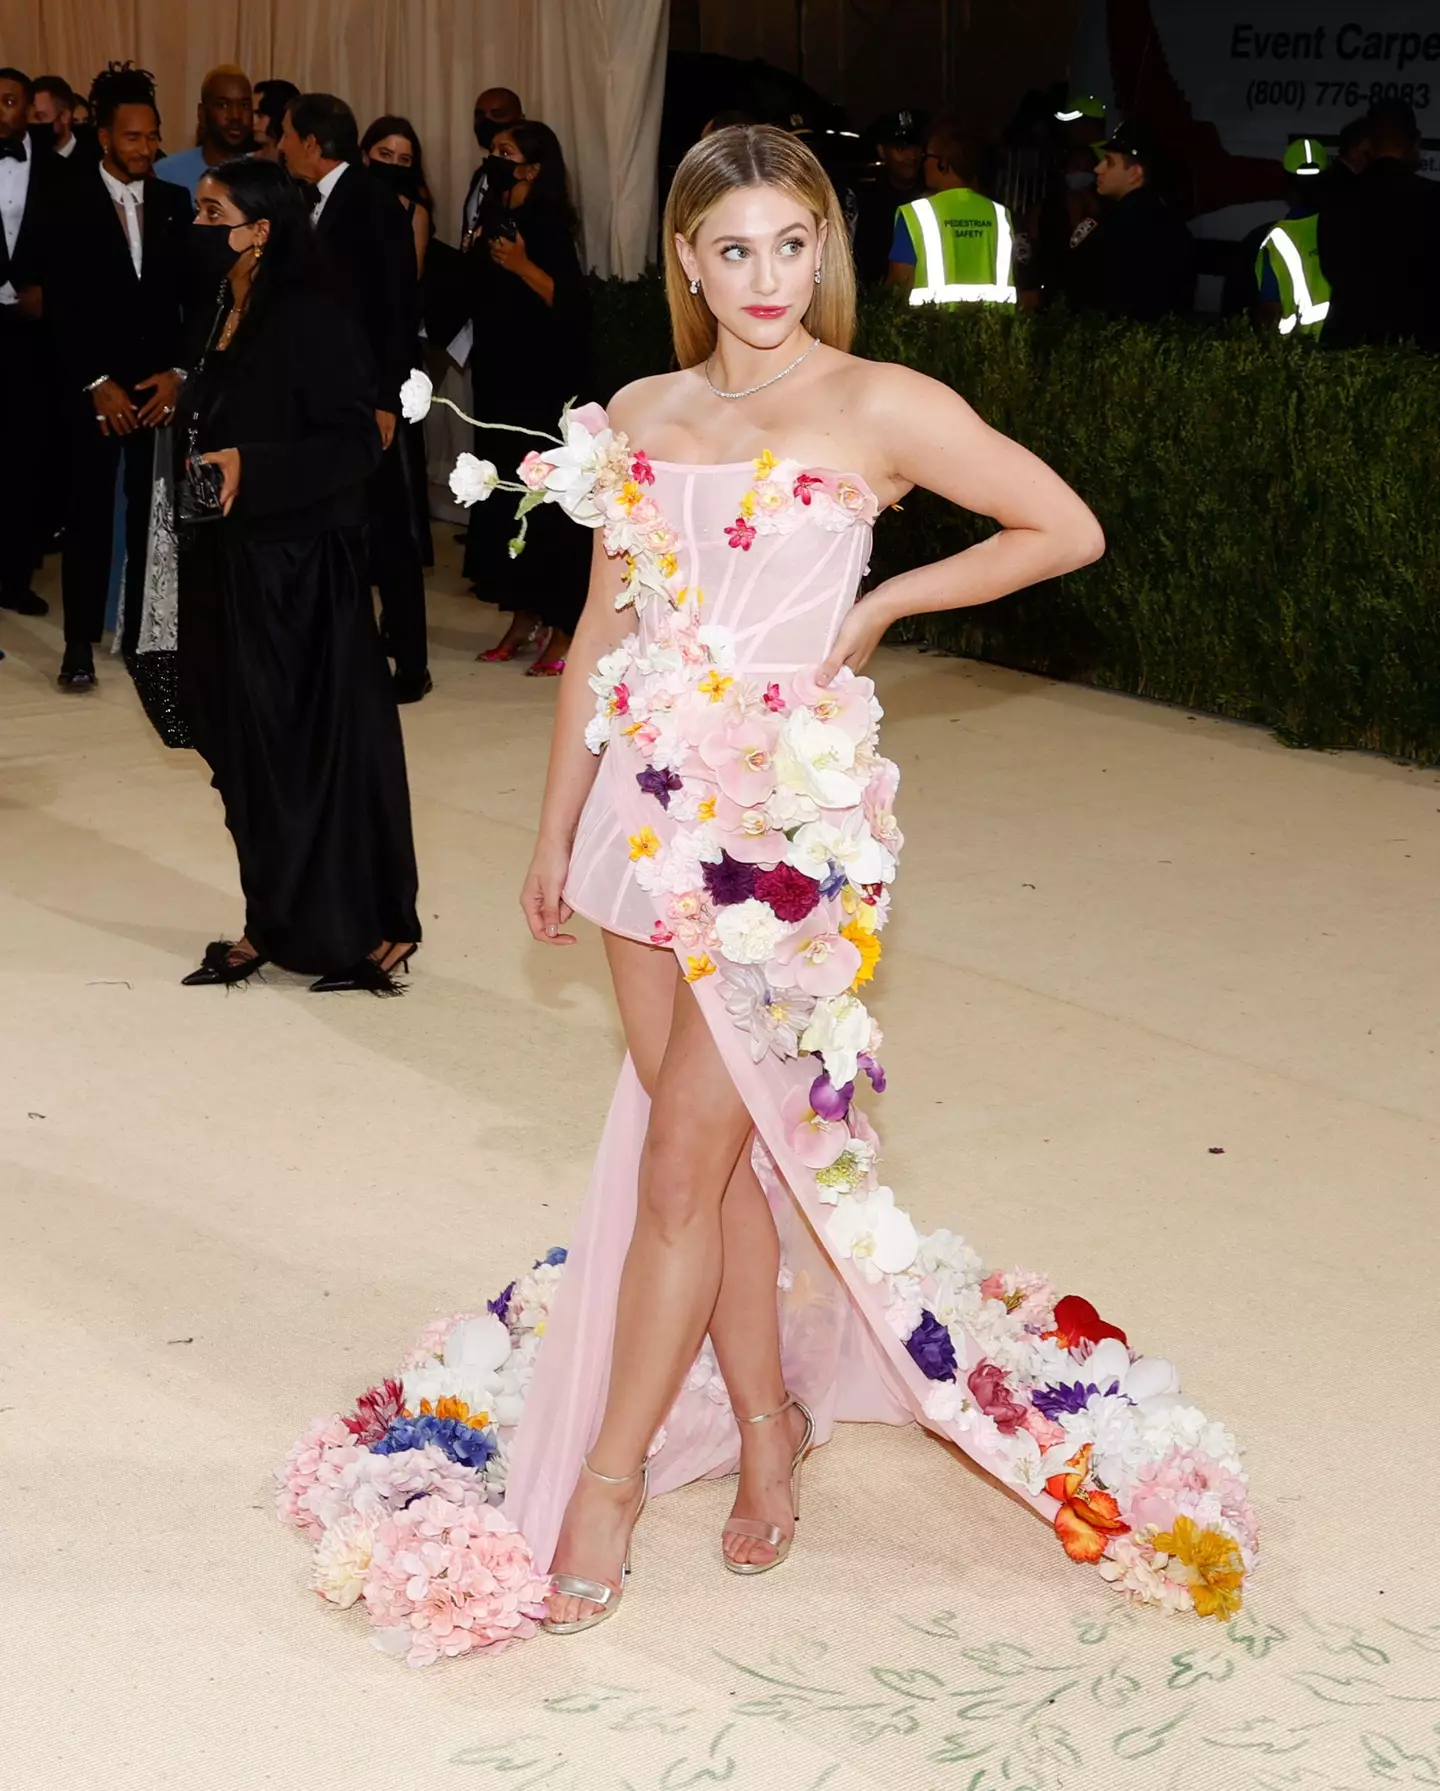 Reinhart has appeared at the Met Gala in the past.